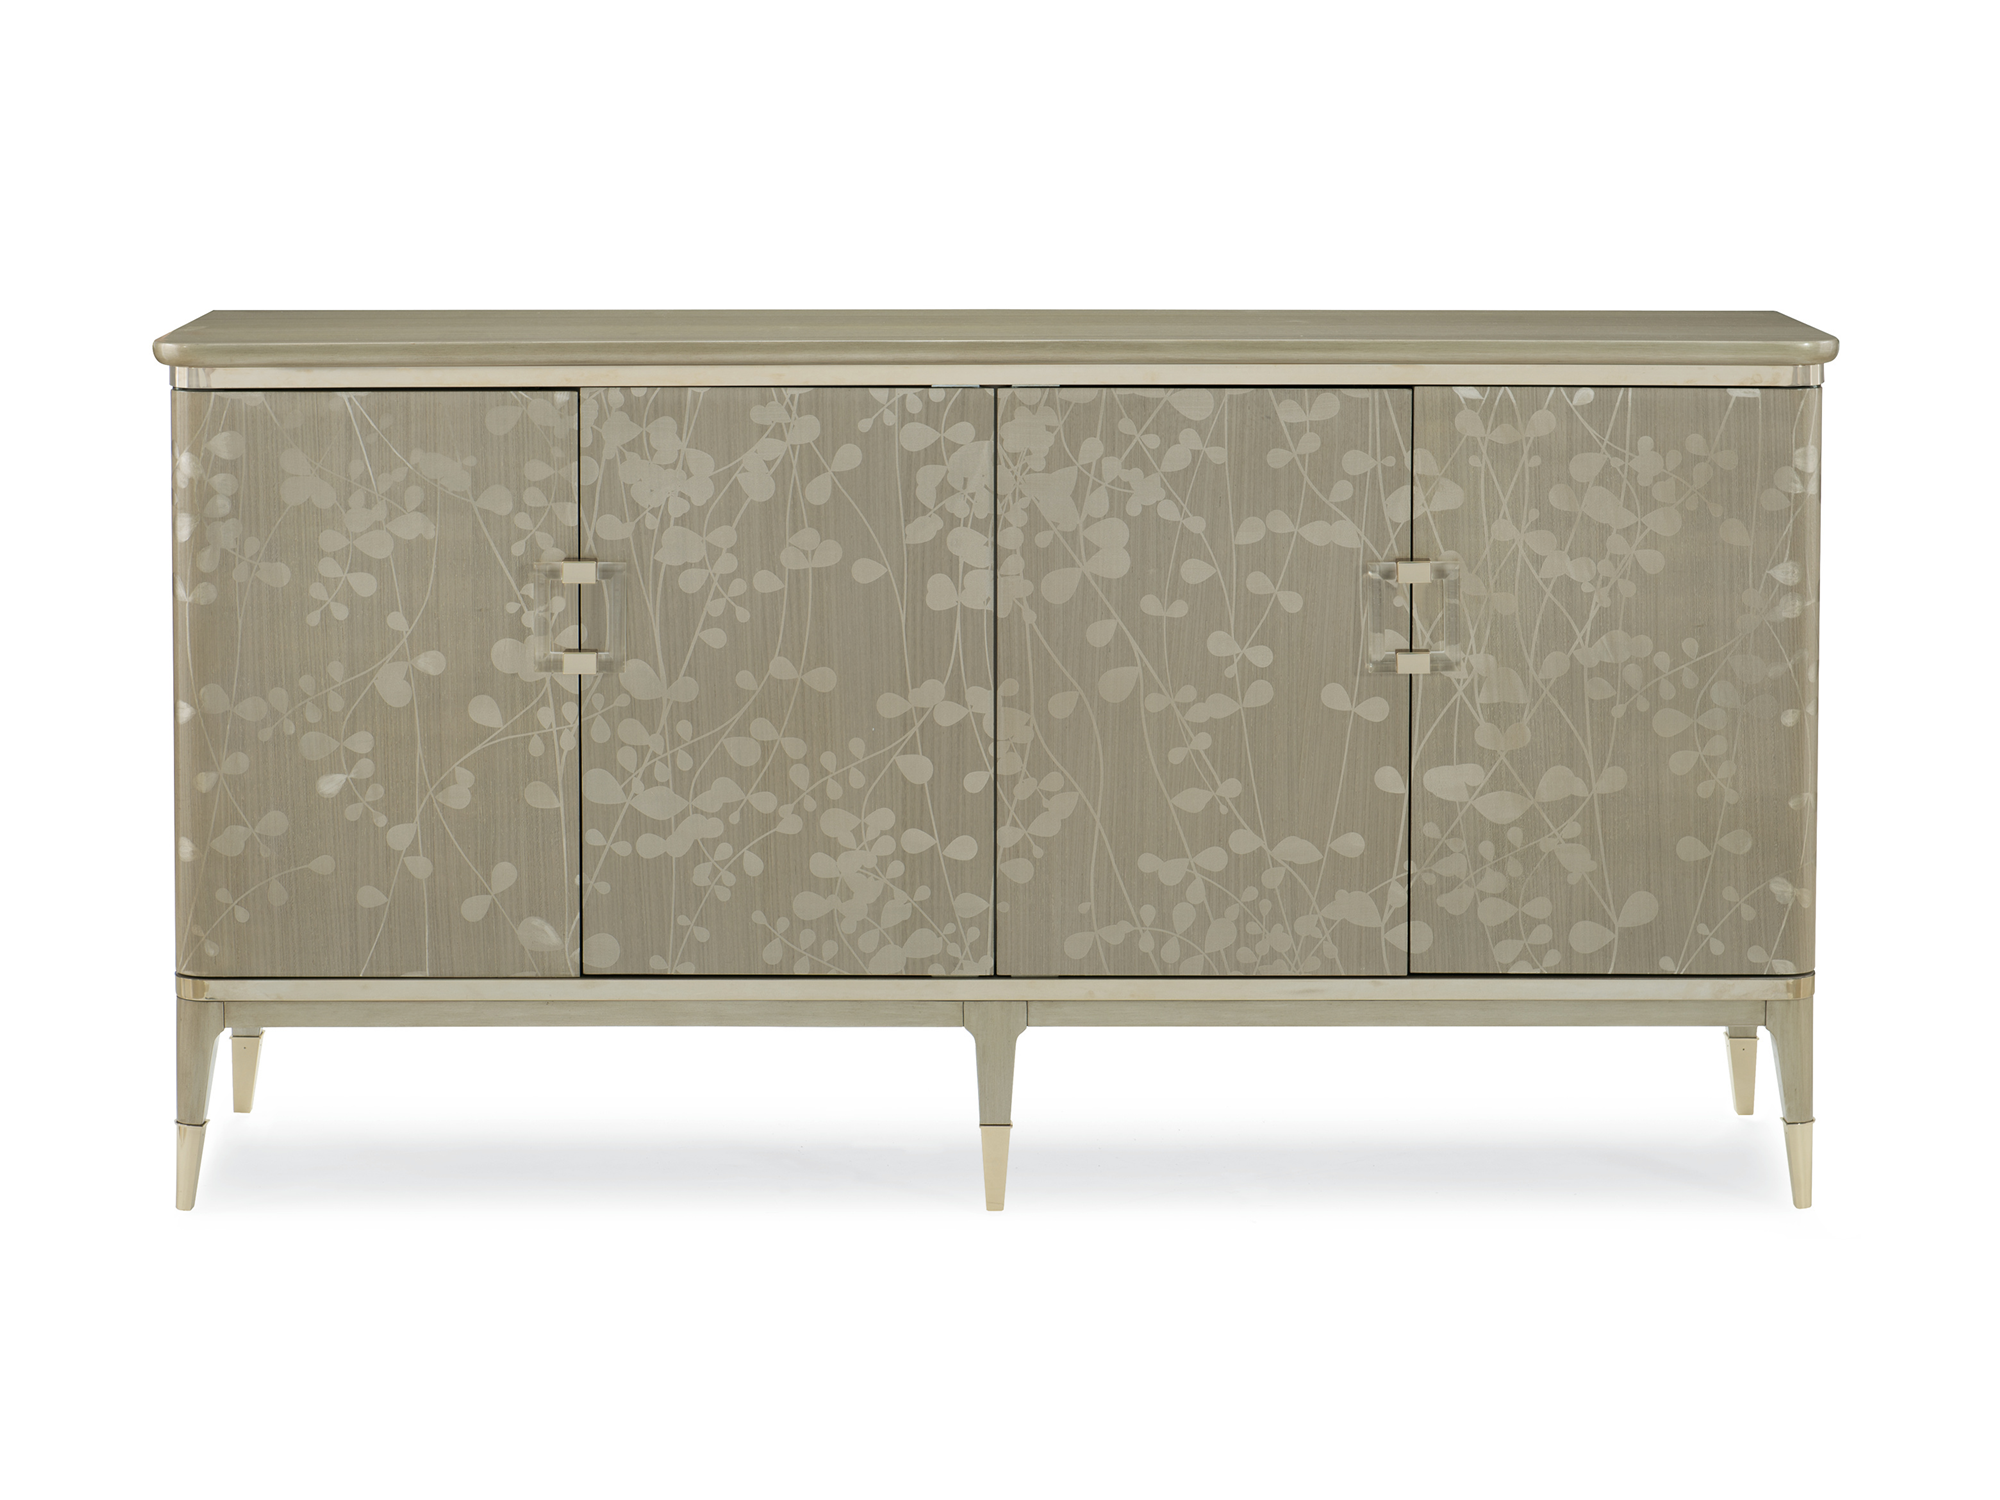 Babs Turn a New Leaf Sideboards - Euro Living Furniture